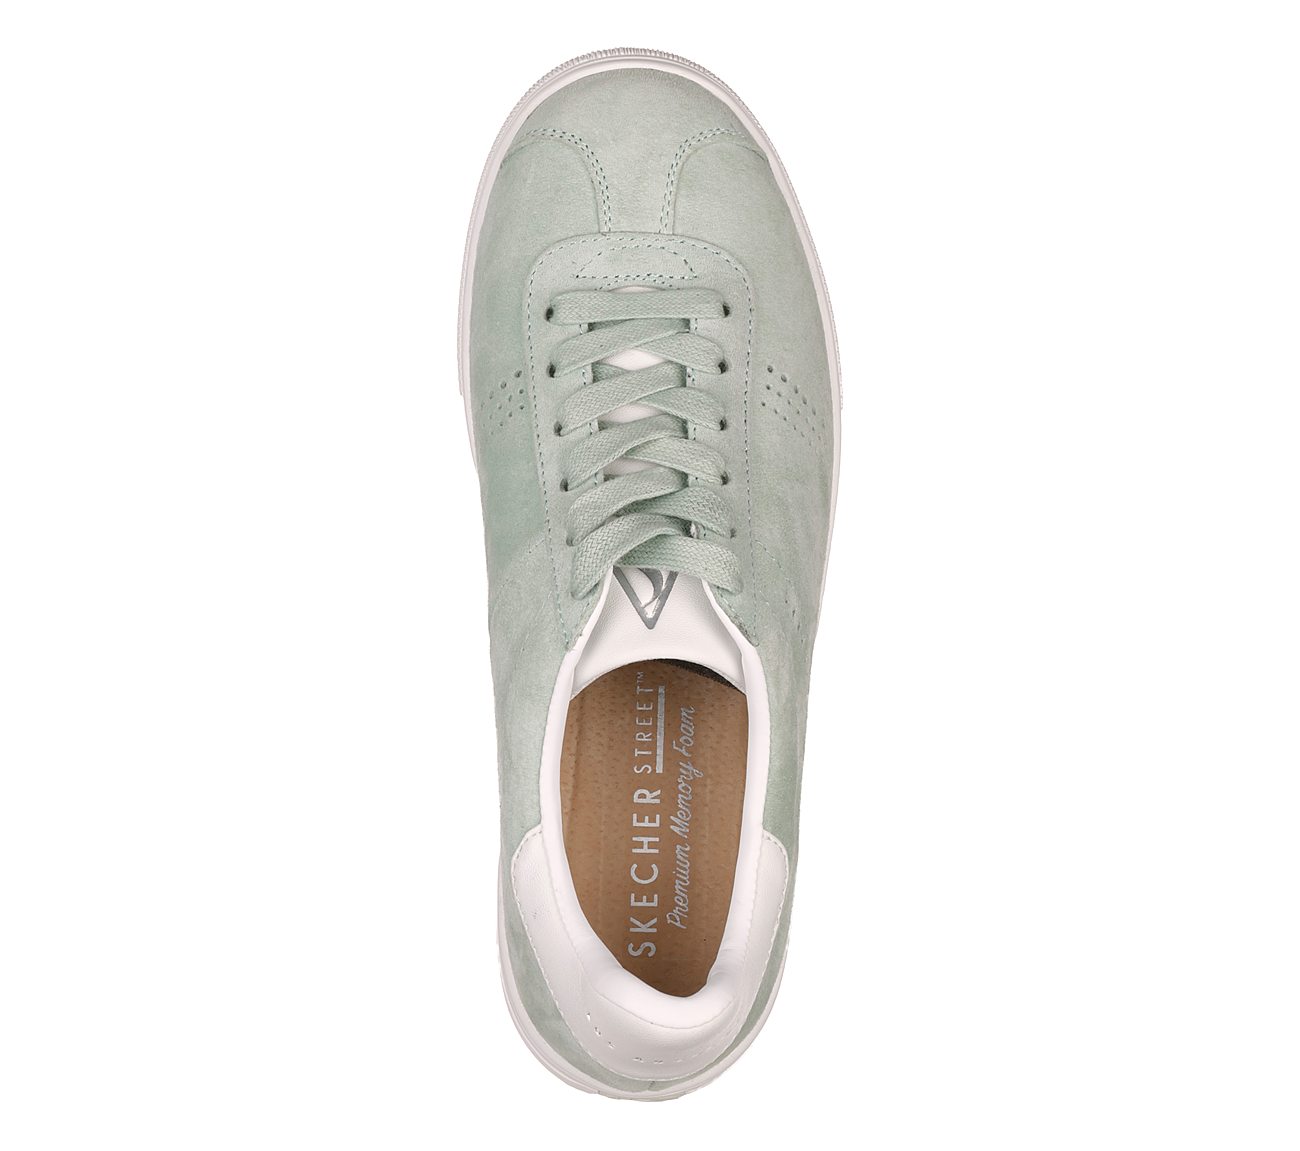 skechers moda perswayed lace up trainers